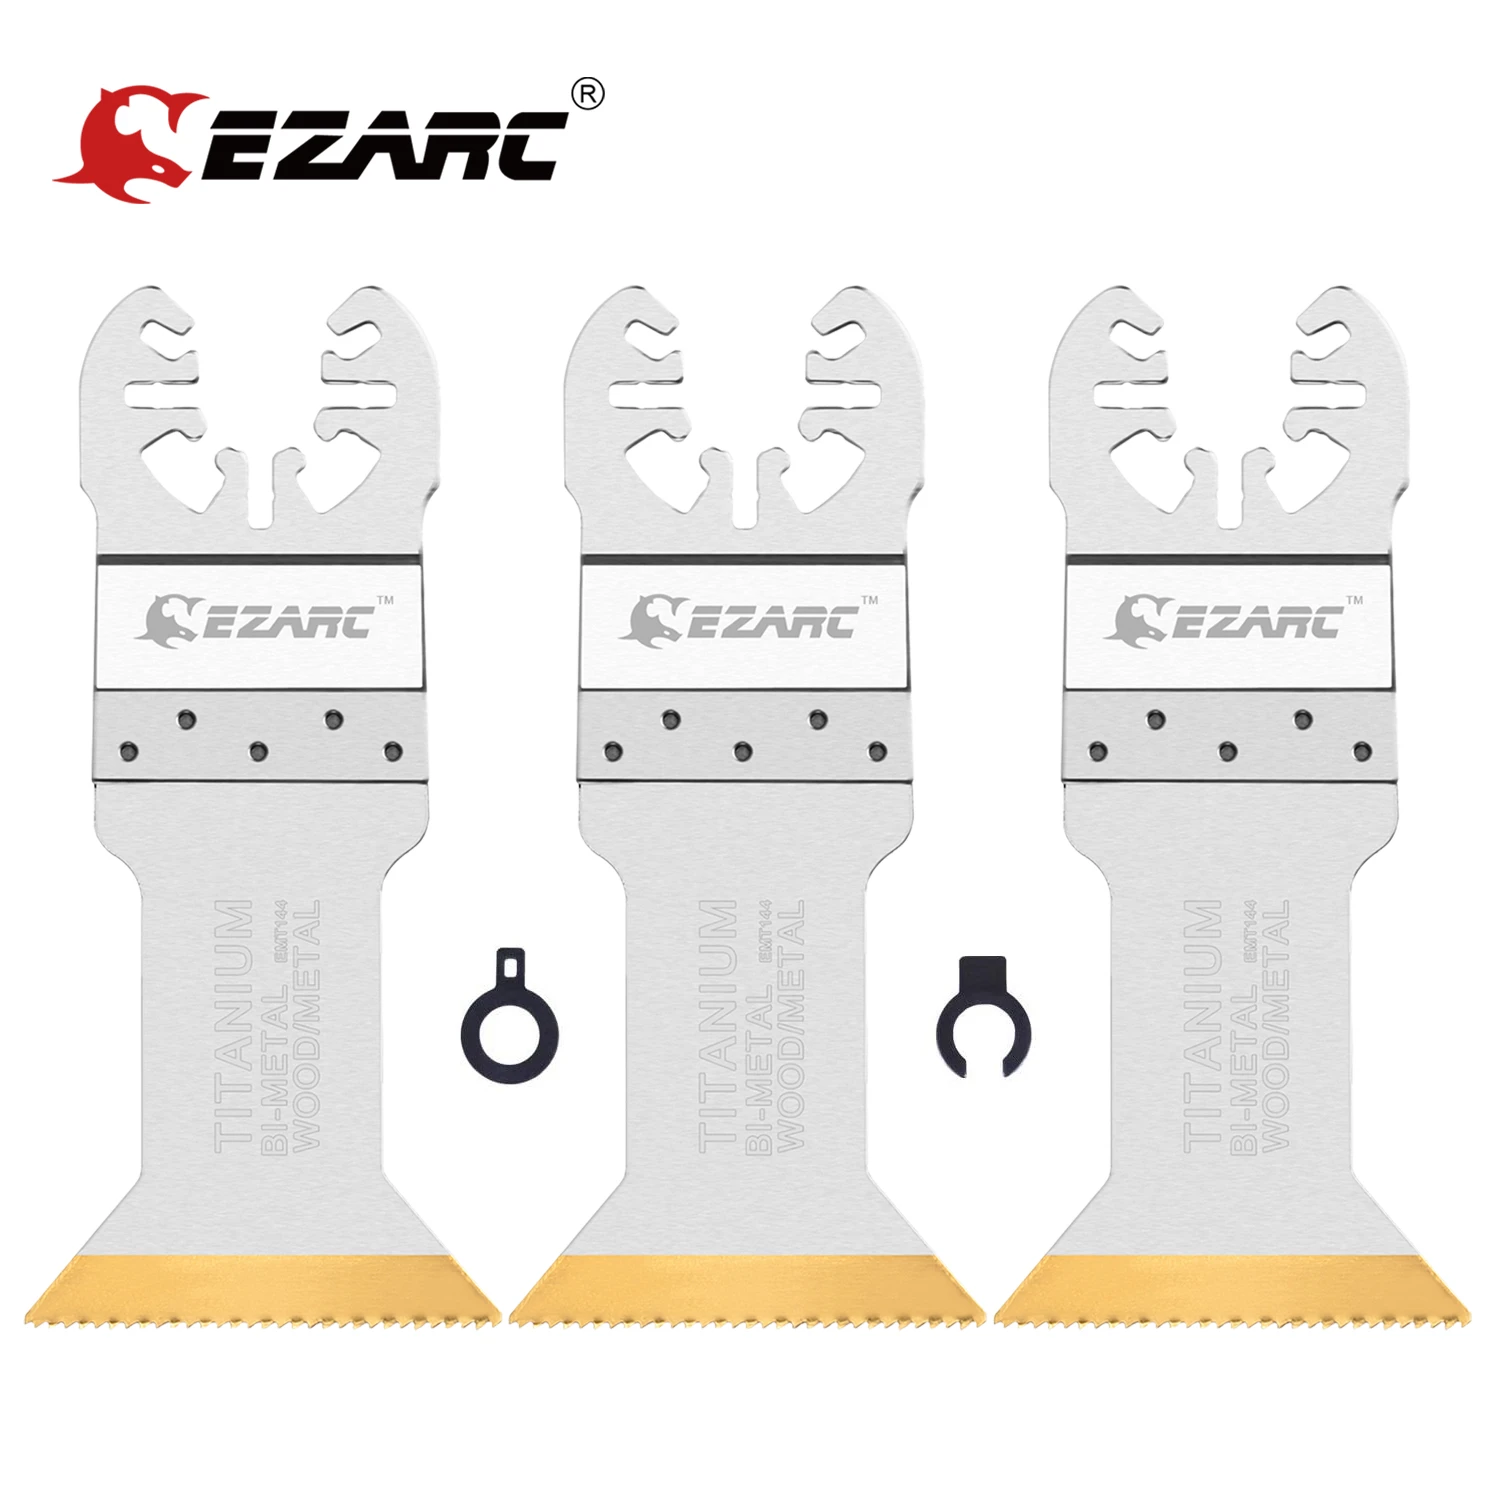 EZARC Titanium Oscillating Multitool Blades Power Cut Saw Blades for Wood, Metal and Hard Material, 3-Pack